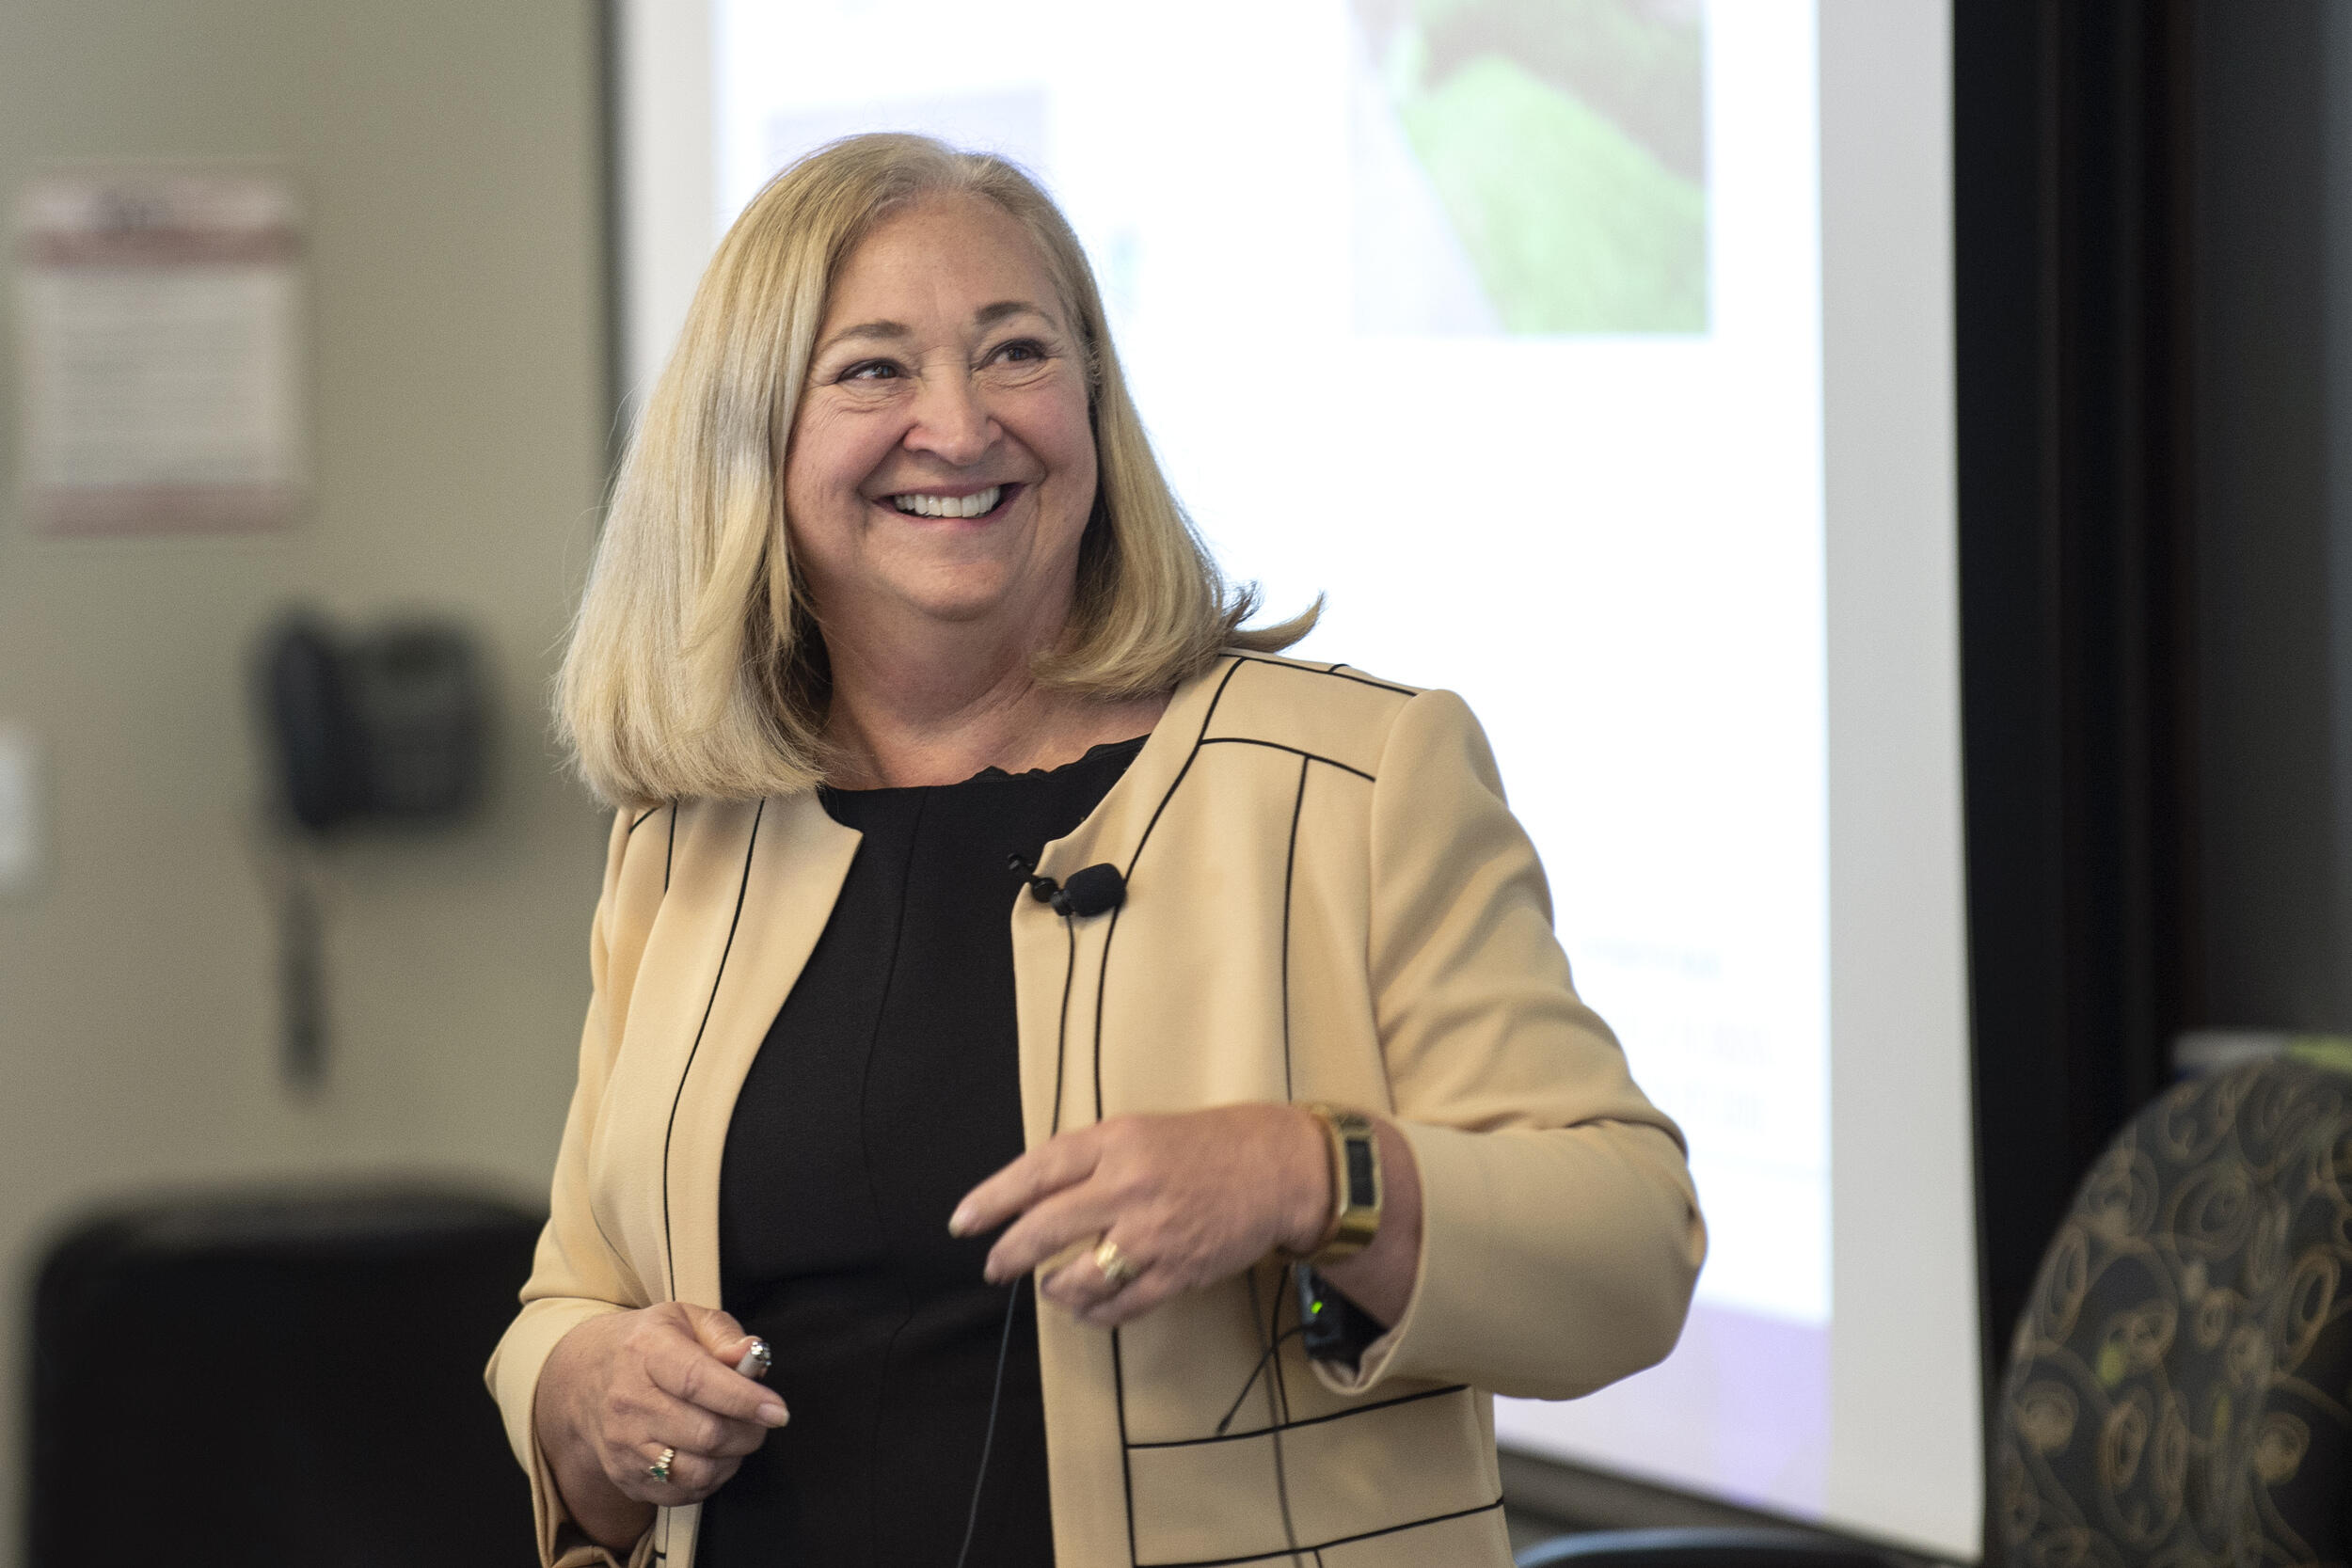 Cindy Munro, Ph.D., talks about the value of nursing research. (Photo by Kevin Morley, University Relations)